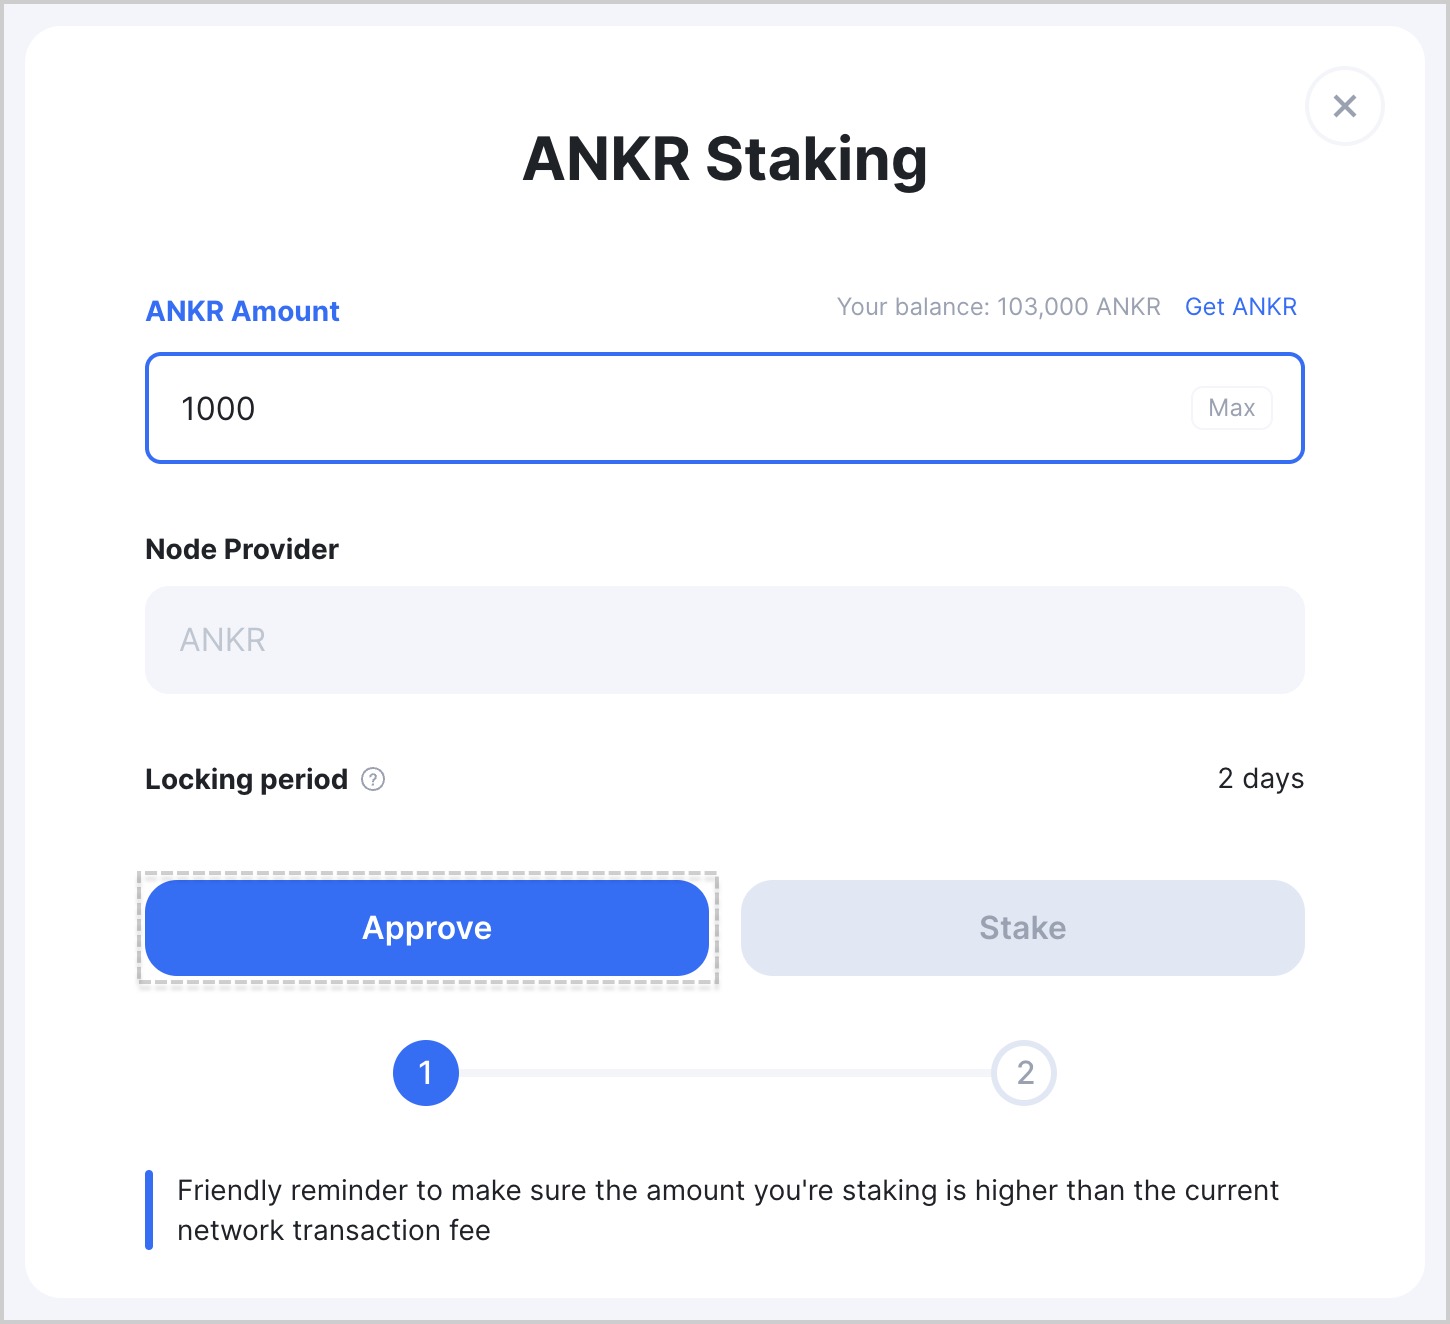 Enter the desired amount of ANKR tokens to stake